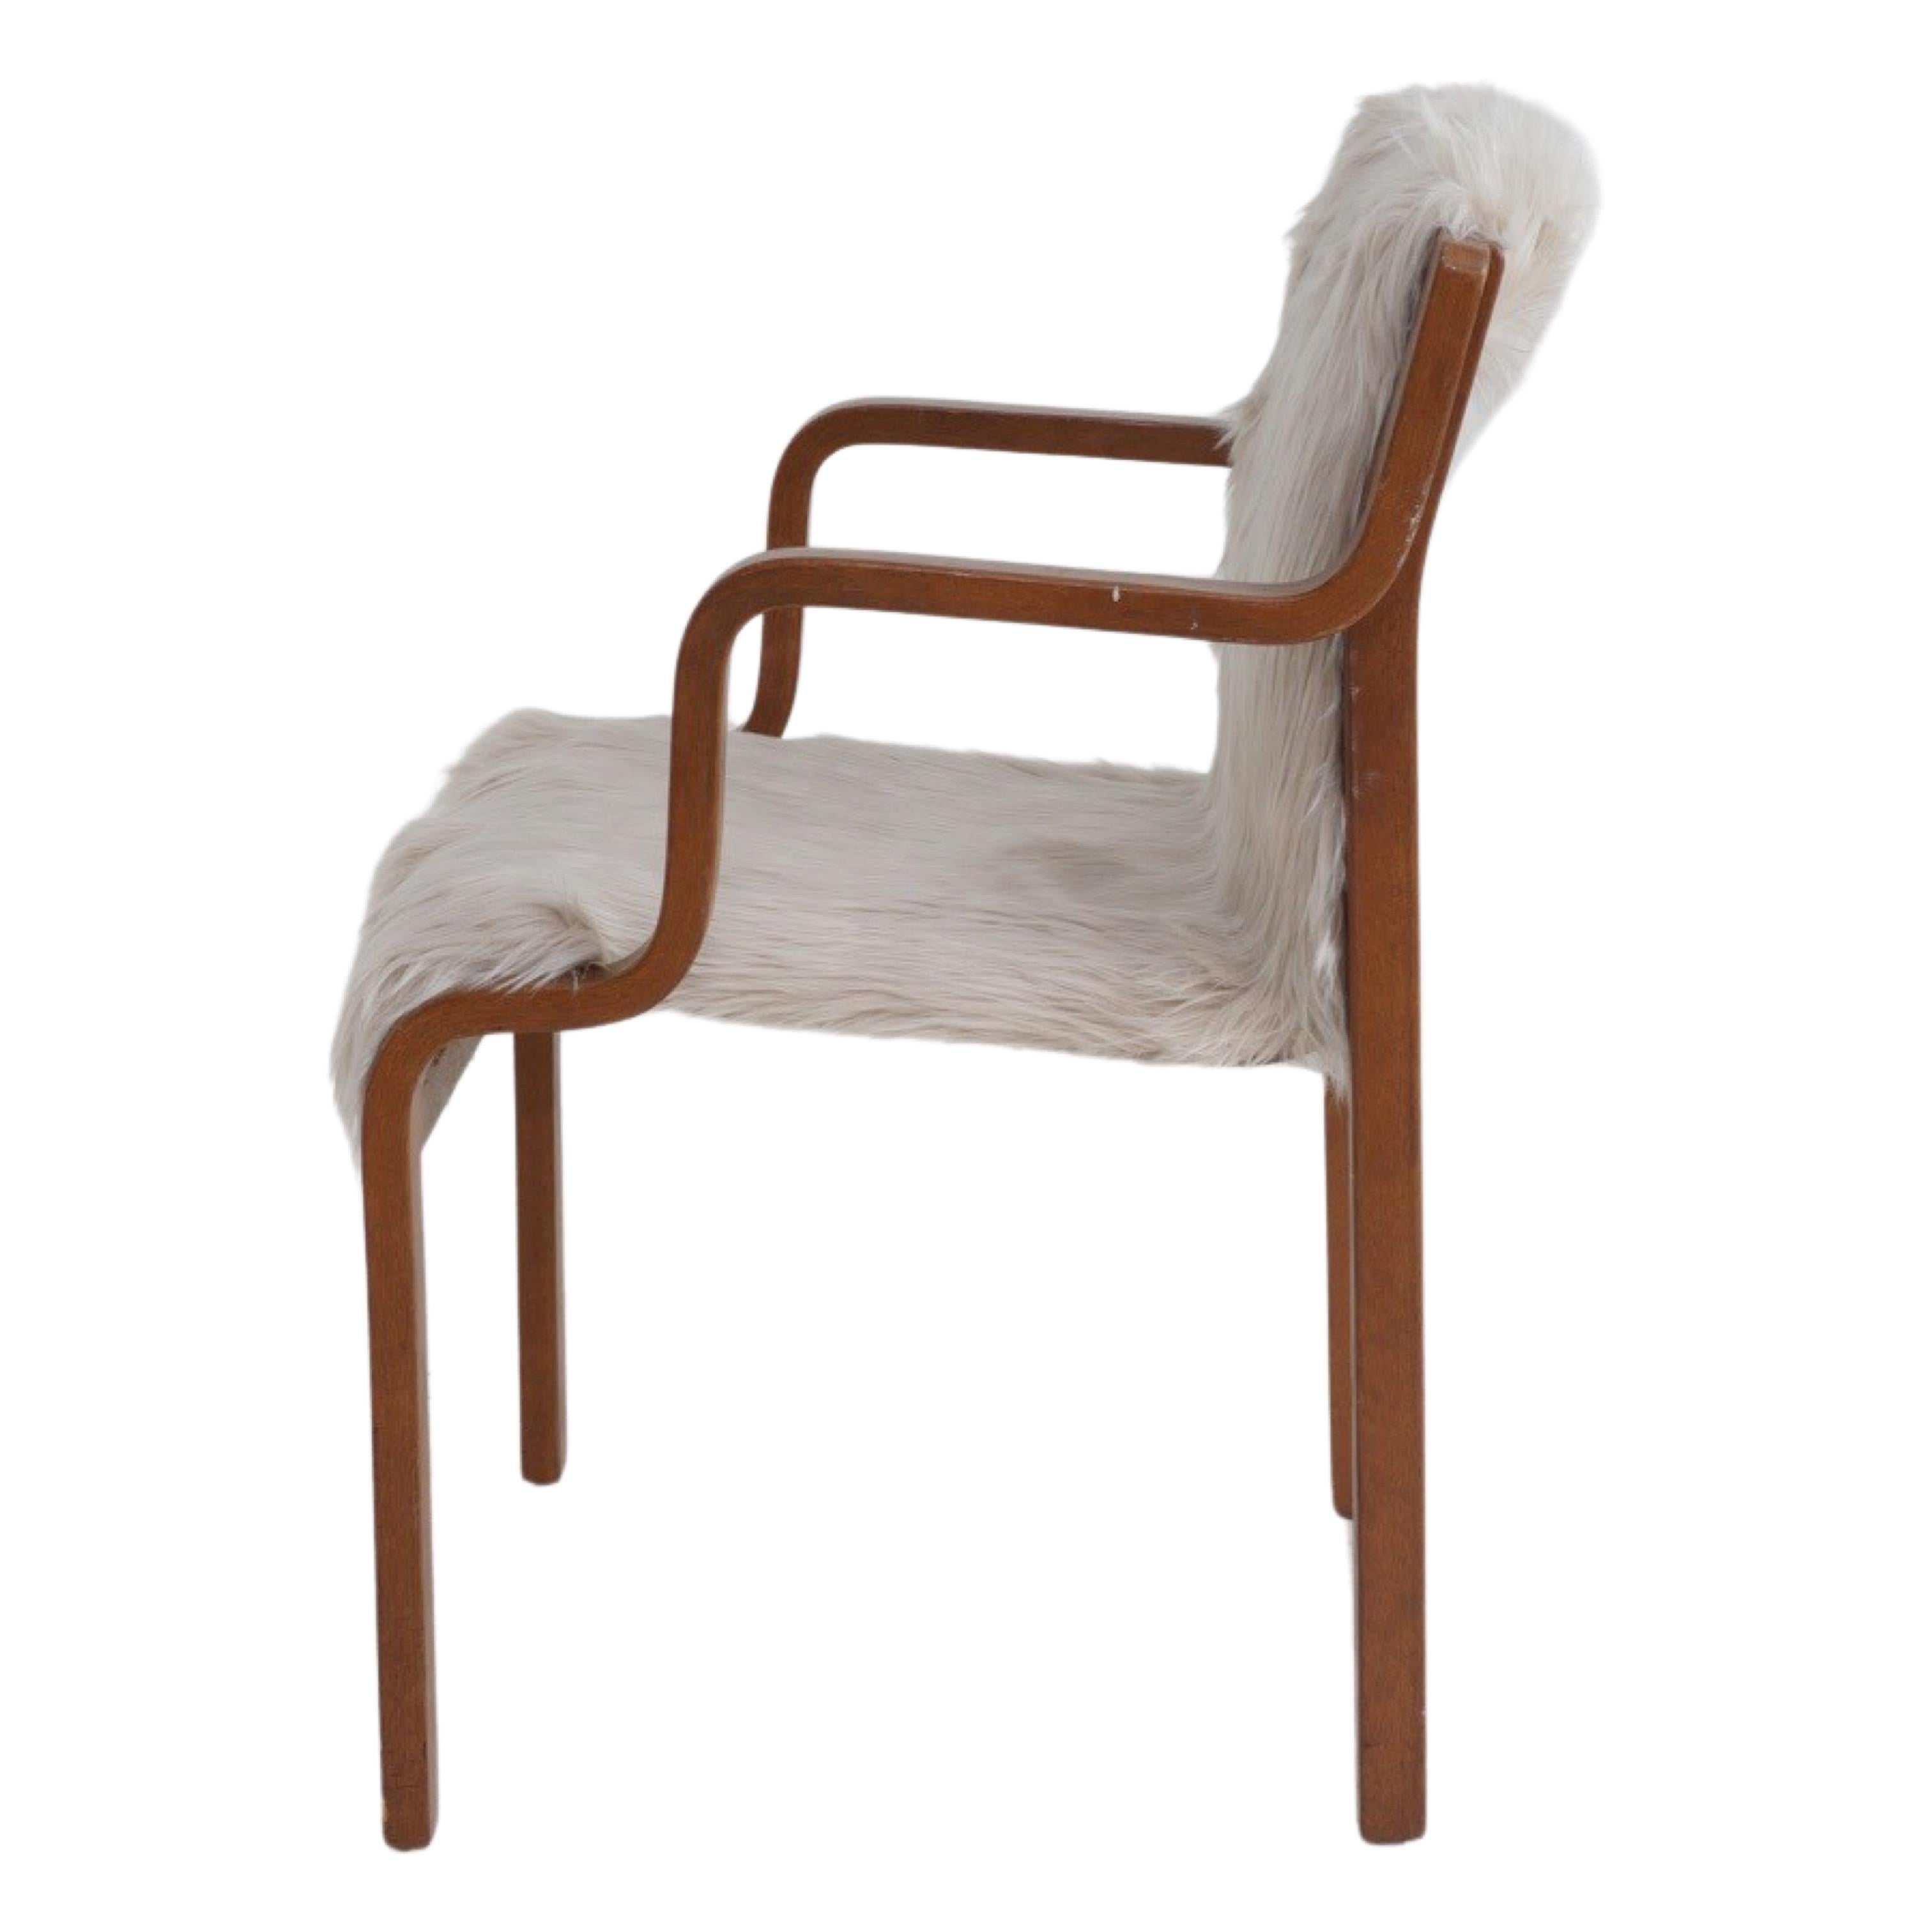 Mid-20th Century Pair of Swedish Bentwood Chairs by Stendig, 1960s For Sale